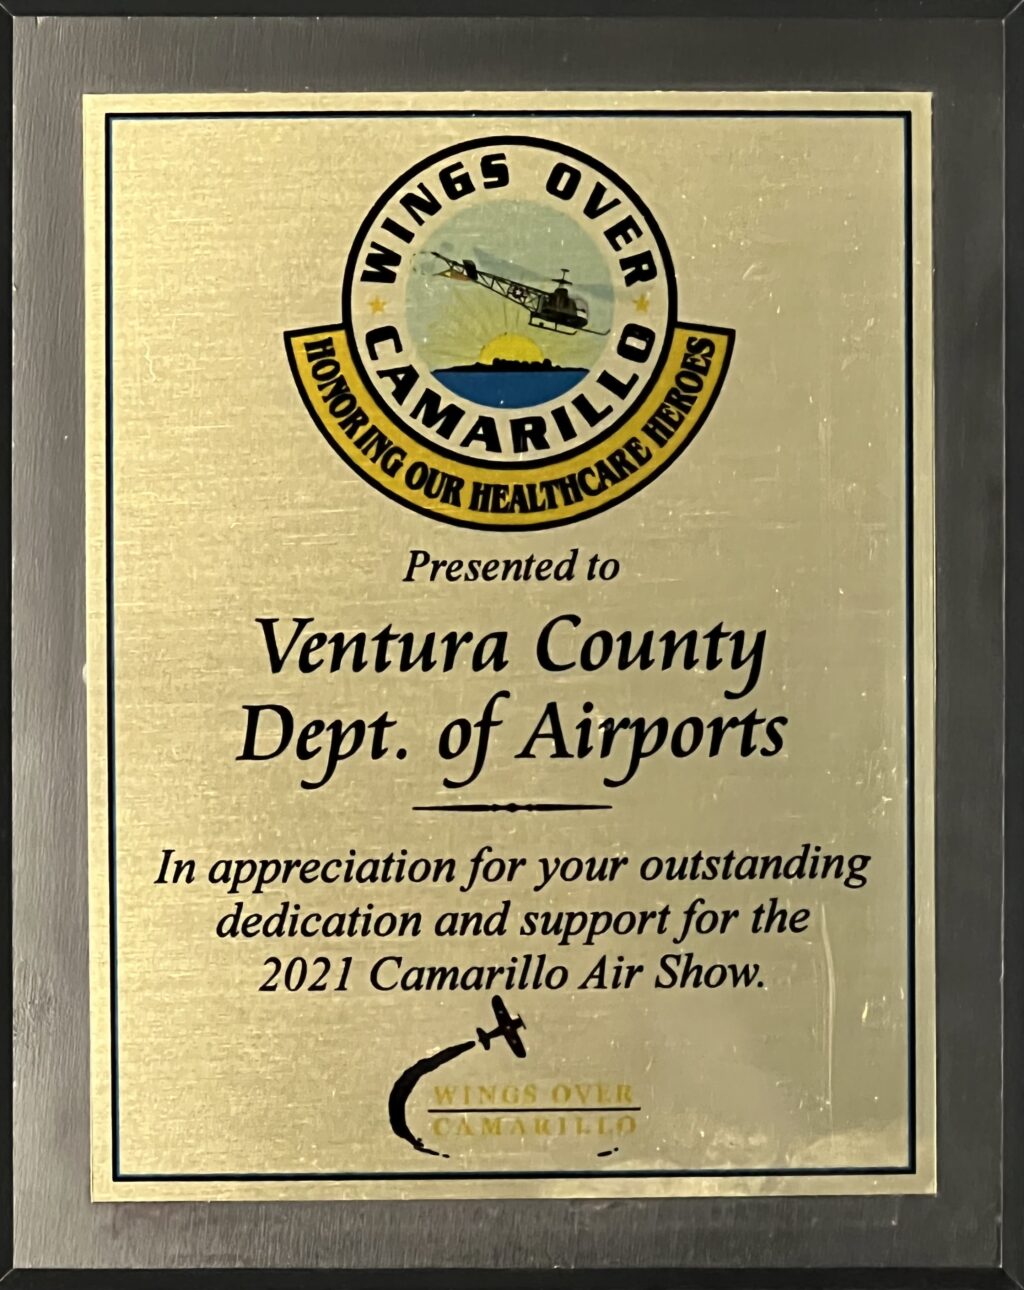 Department of Airports Recognized